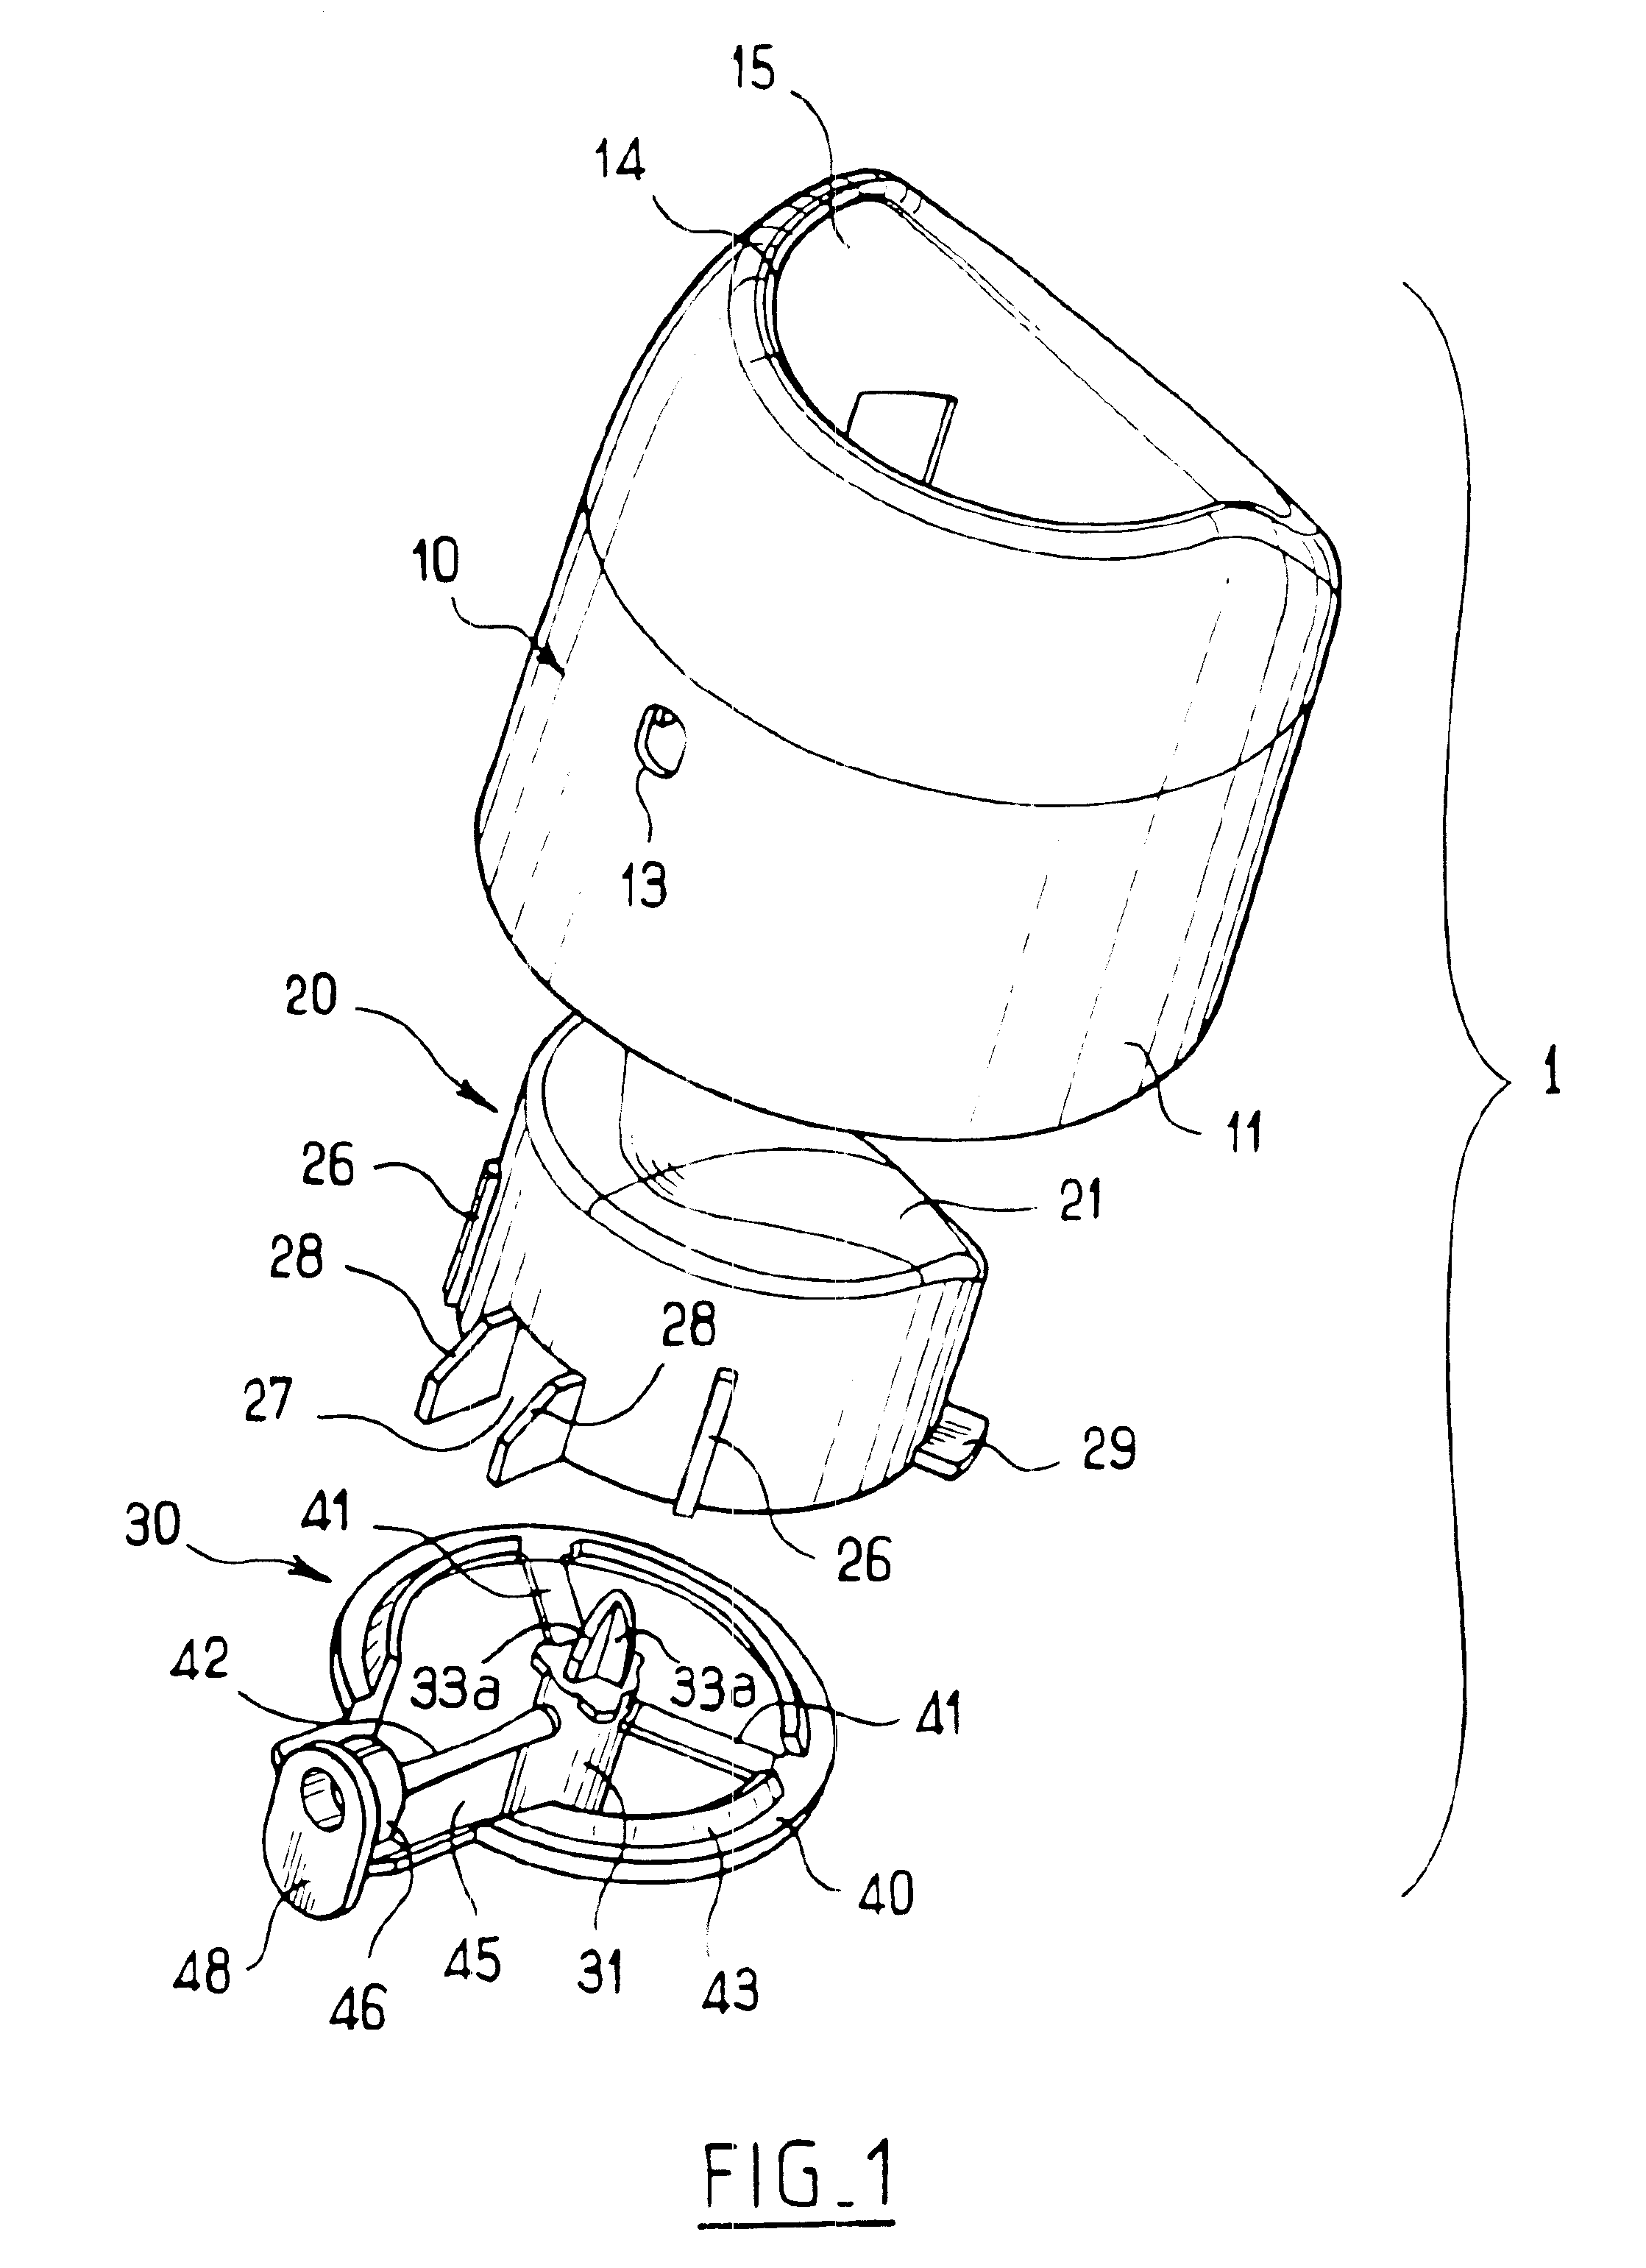 Dispenser device for fitting to a receptacle provided with a valve